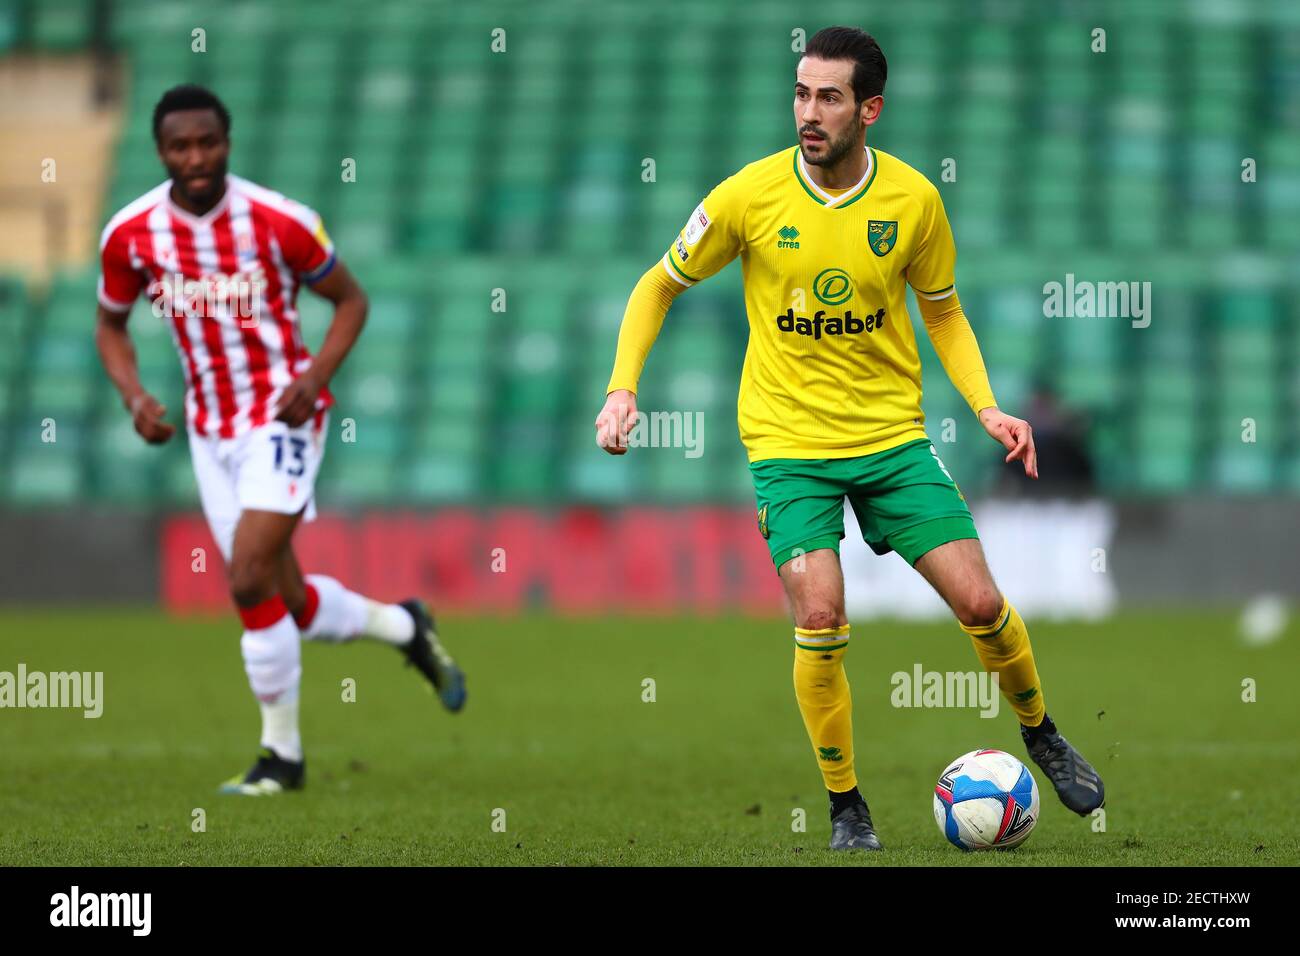 Mario Vrancic of Norwich City and Mikel John Obi of Stoke City - Norwich City v Stoke City, Sky Bet Championship, Carrow Road, Norwich, UK - 13th February 2021  Editorial Use Only - DataCo restrictions apply Stock Photo